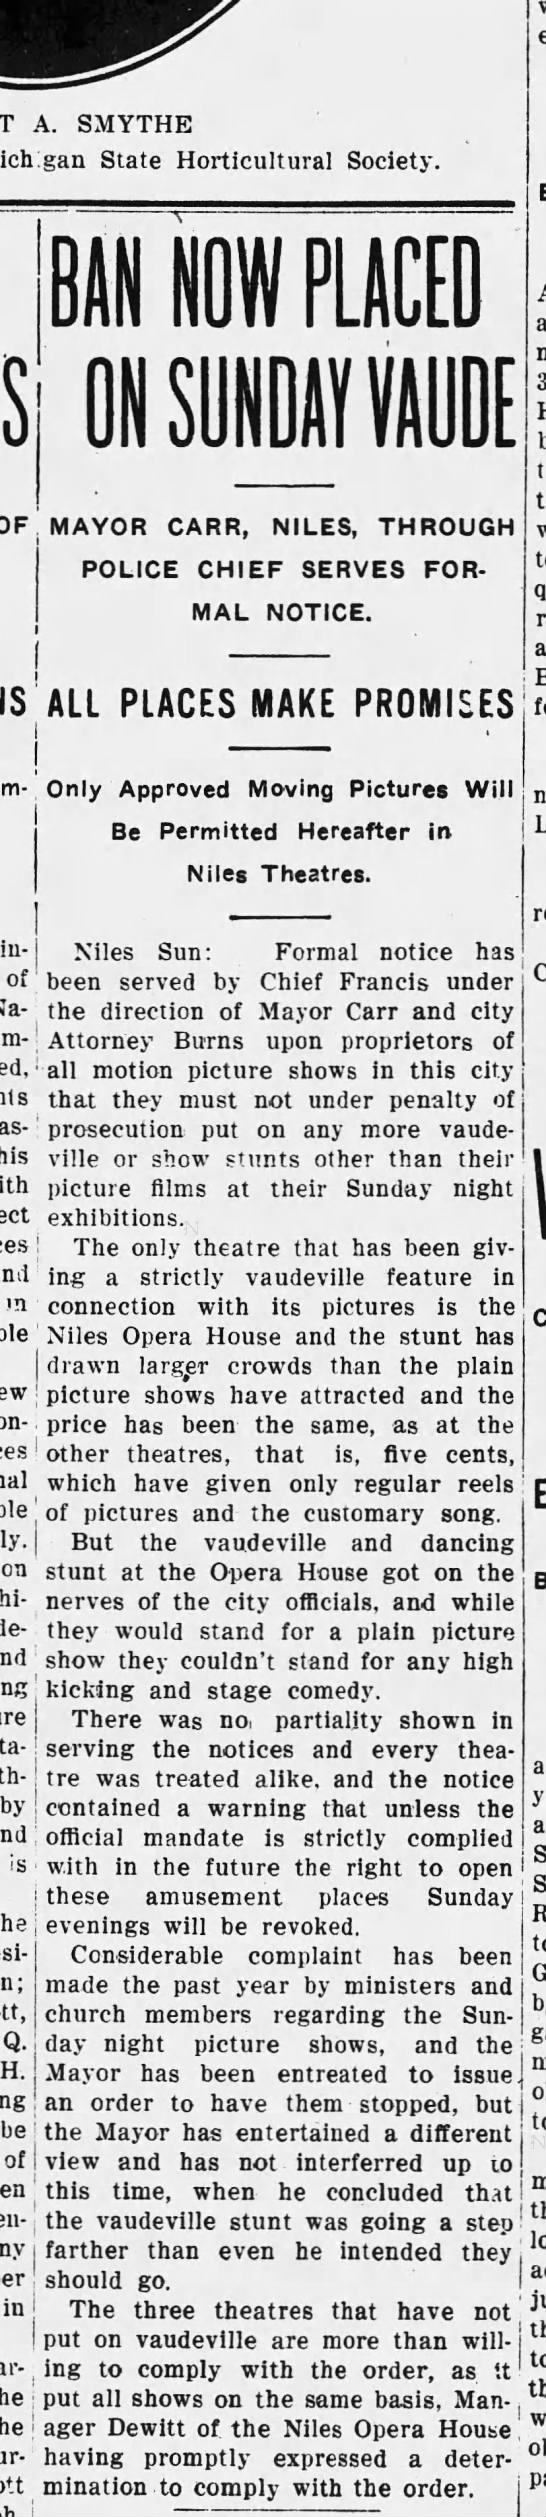 Niles Opera House - 09 DEC 1910 ARTICLE ON SHOWING FILMS